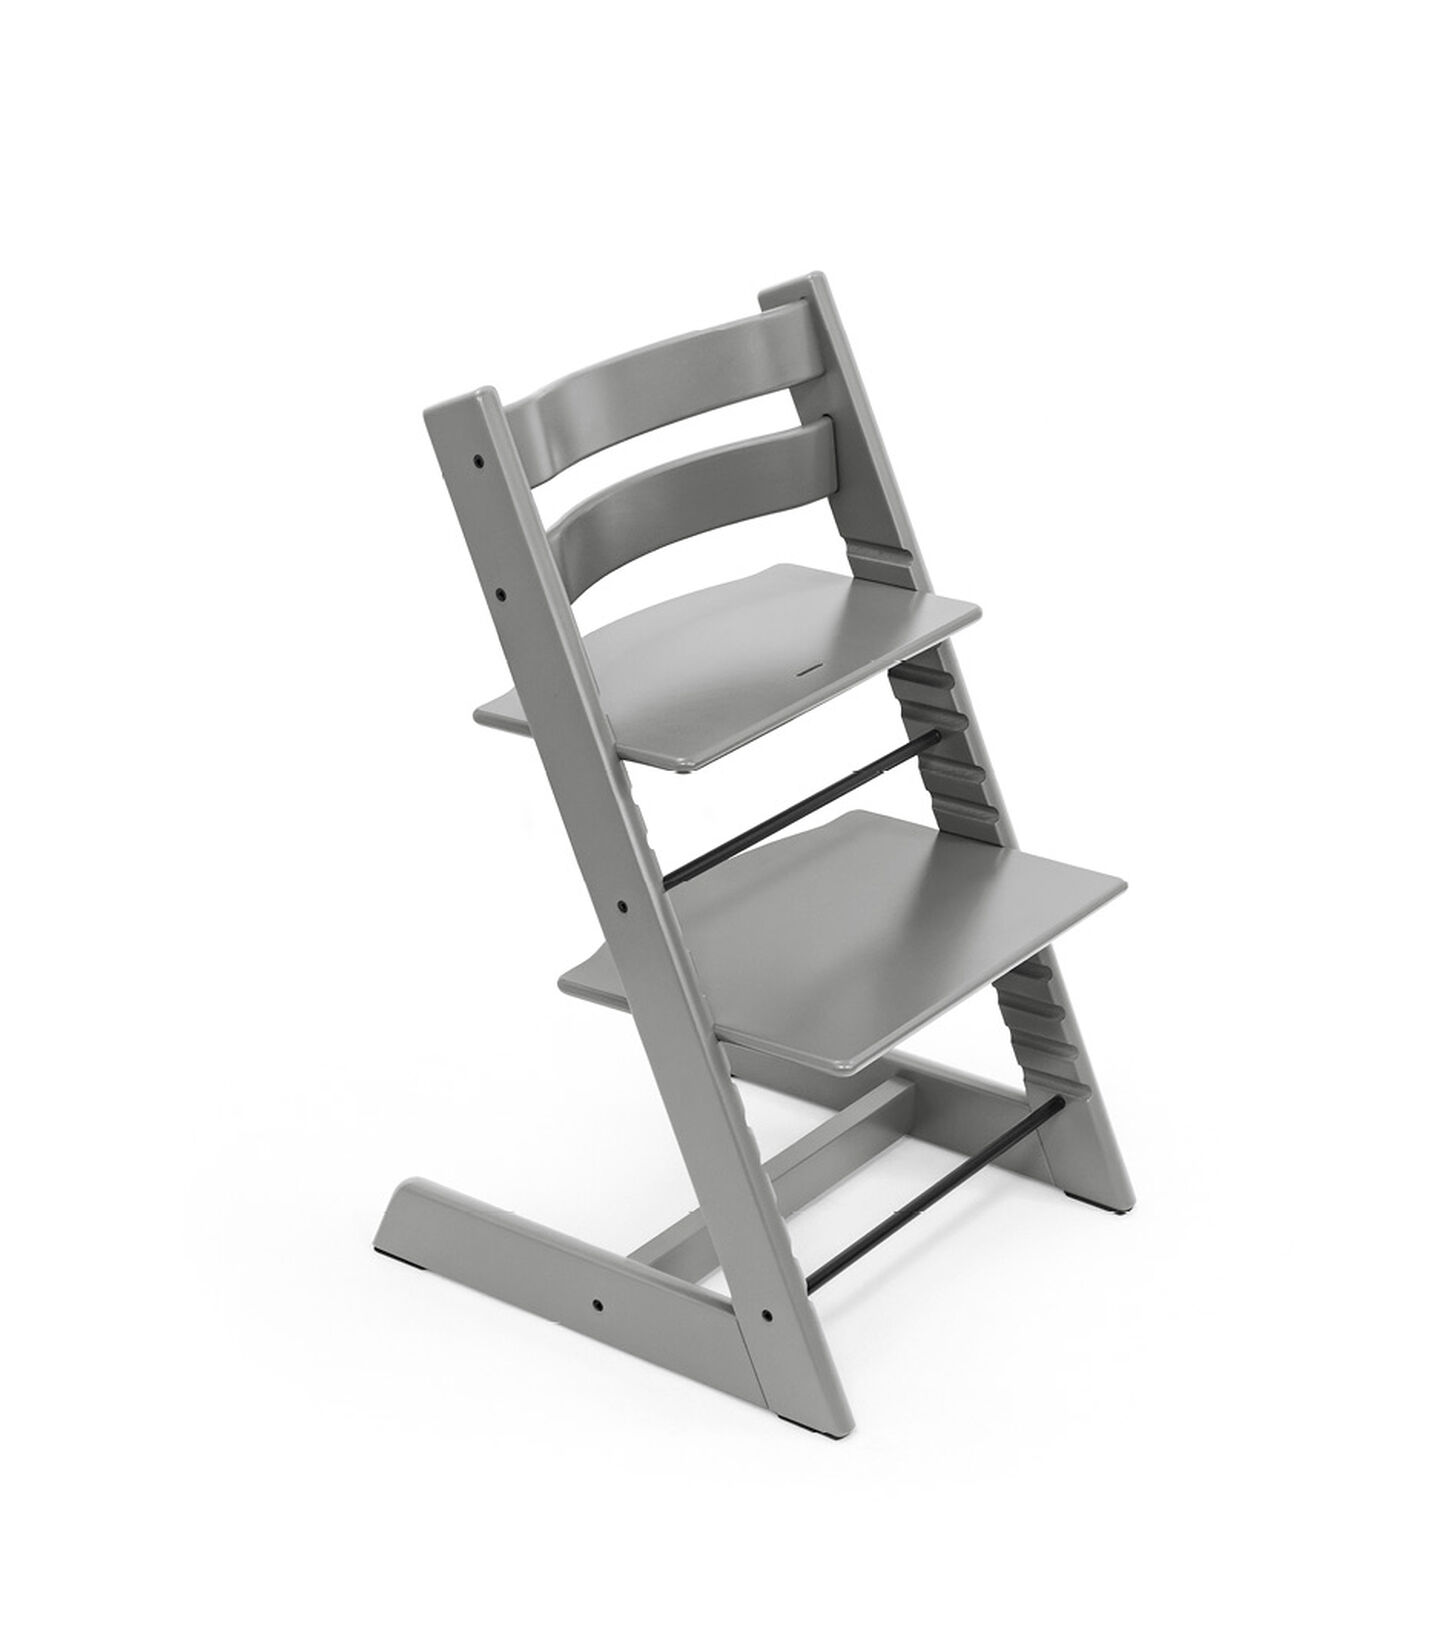 Tripp Trapp® Chair Storm Grey, Storm Grey, mainview view 1